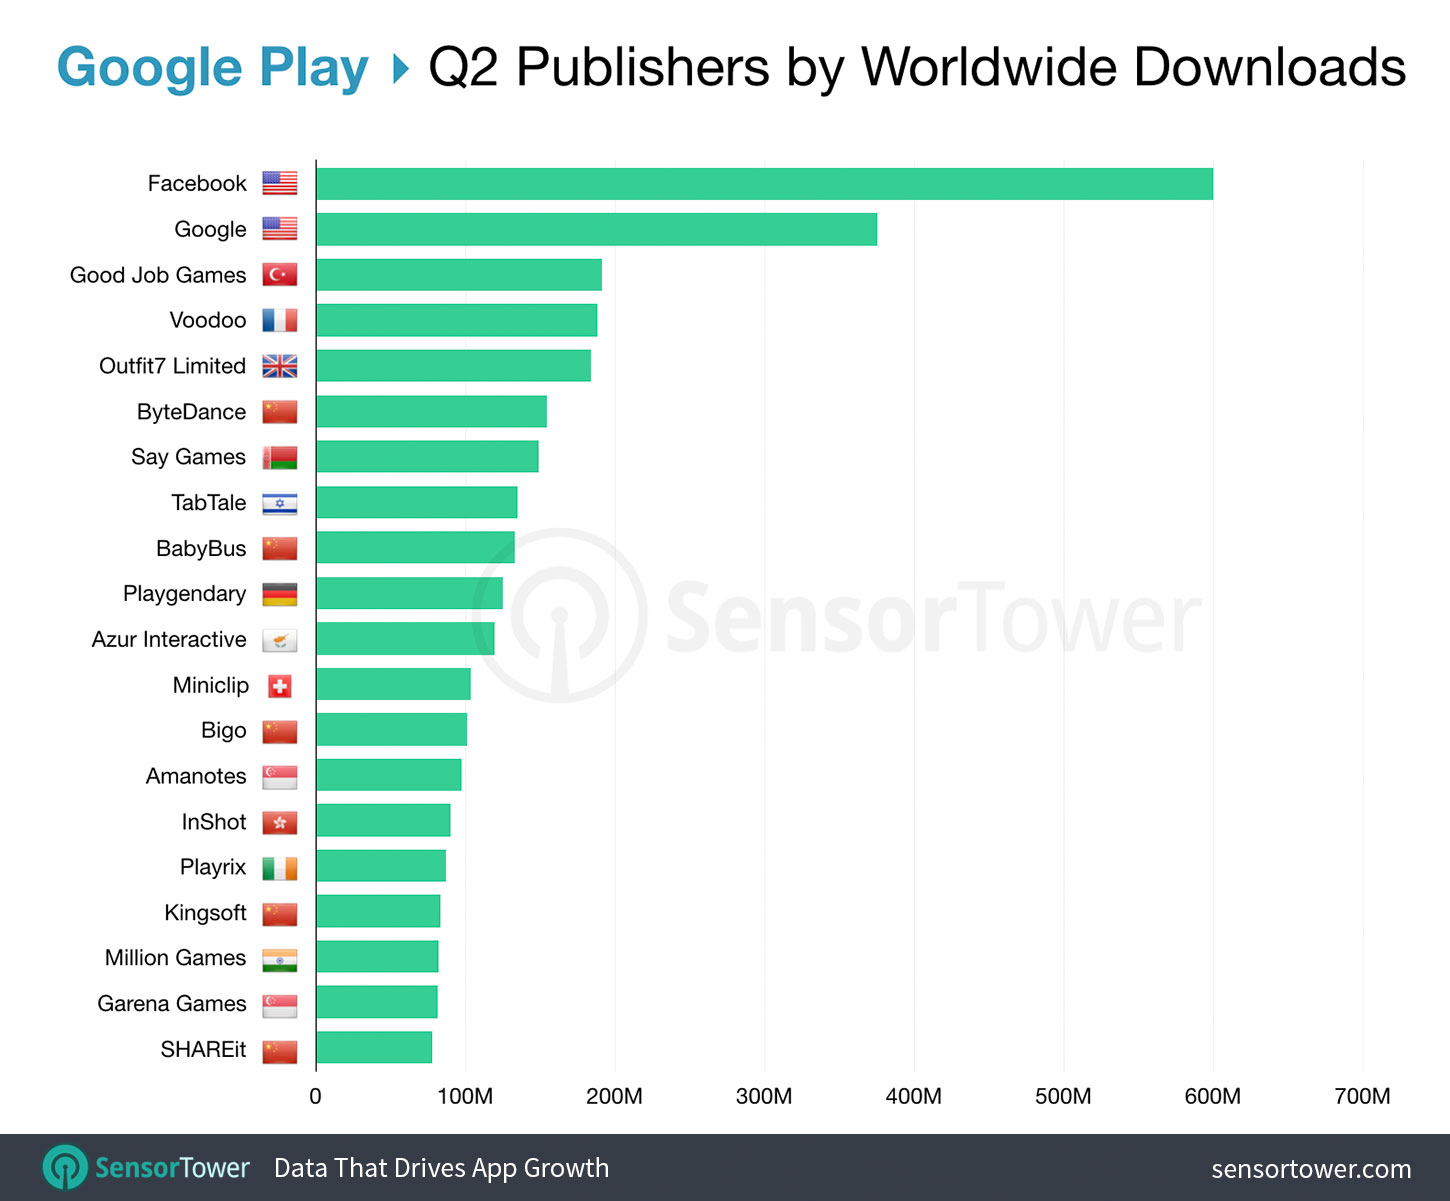 Top Google Play Publishers Worldwide for Q2 2019